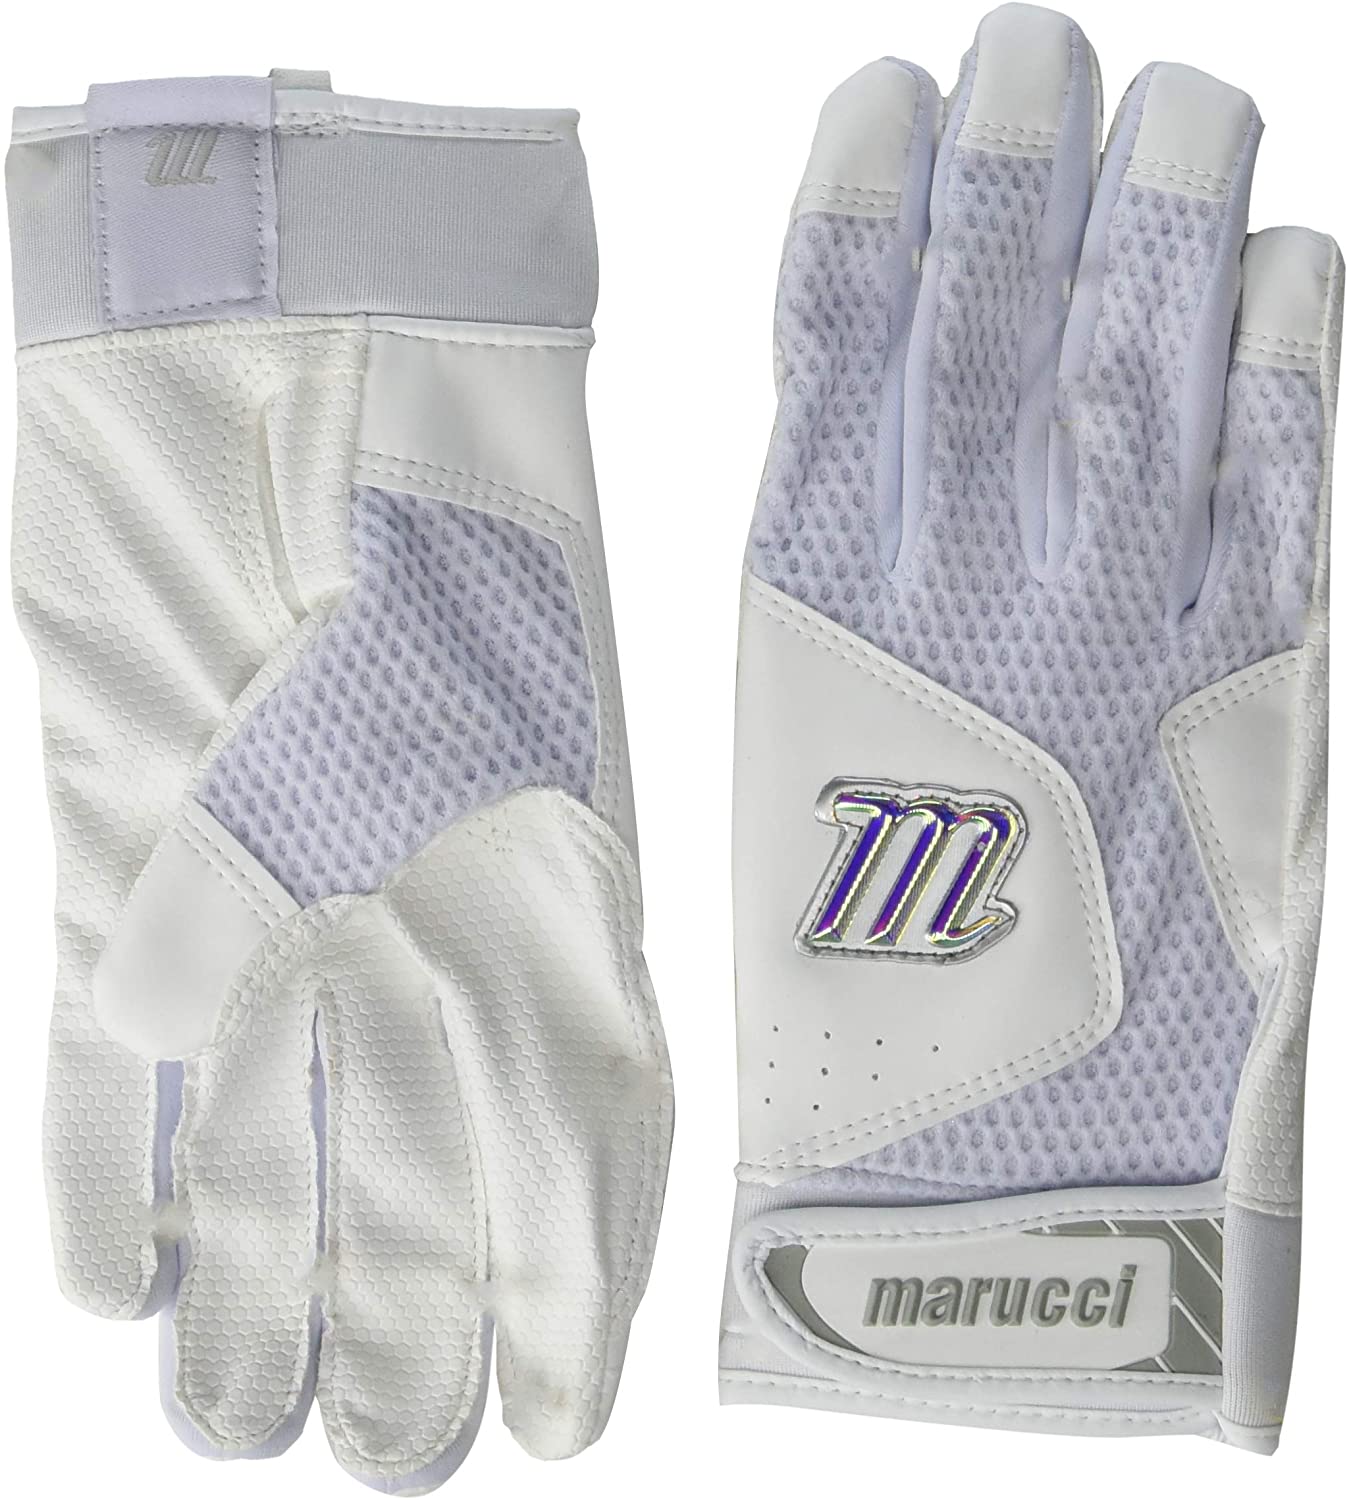 marucci-mbgqst2y-ww-ys-youth-quest-2-0-batting-gloves-youth-small MBGQST2Y-WW-YS Marucci  Consistency and craftsmanship Commitment to quality and understanding of players Designed